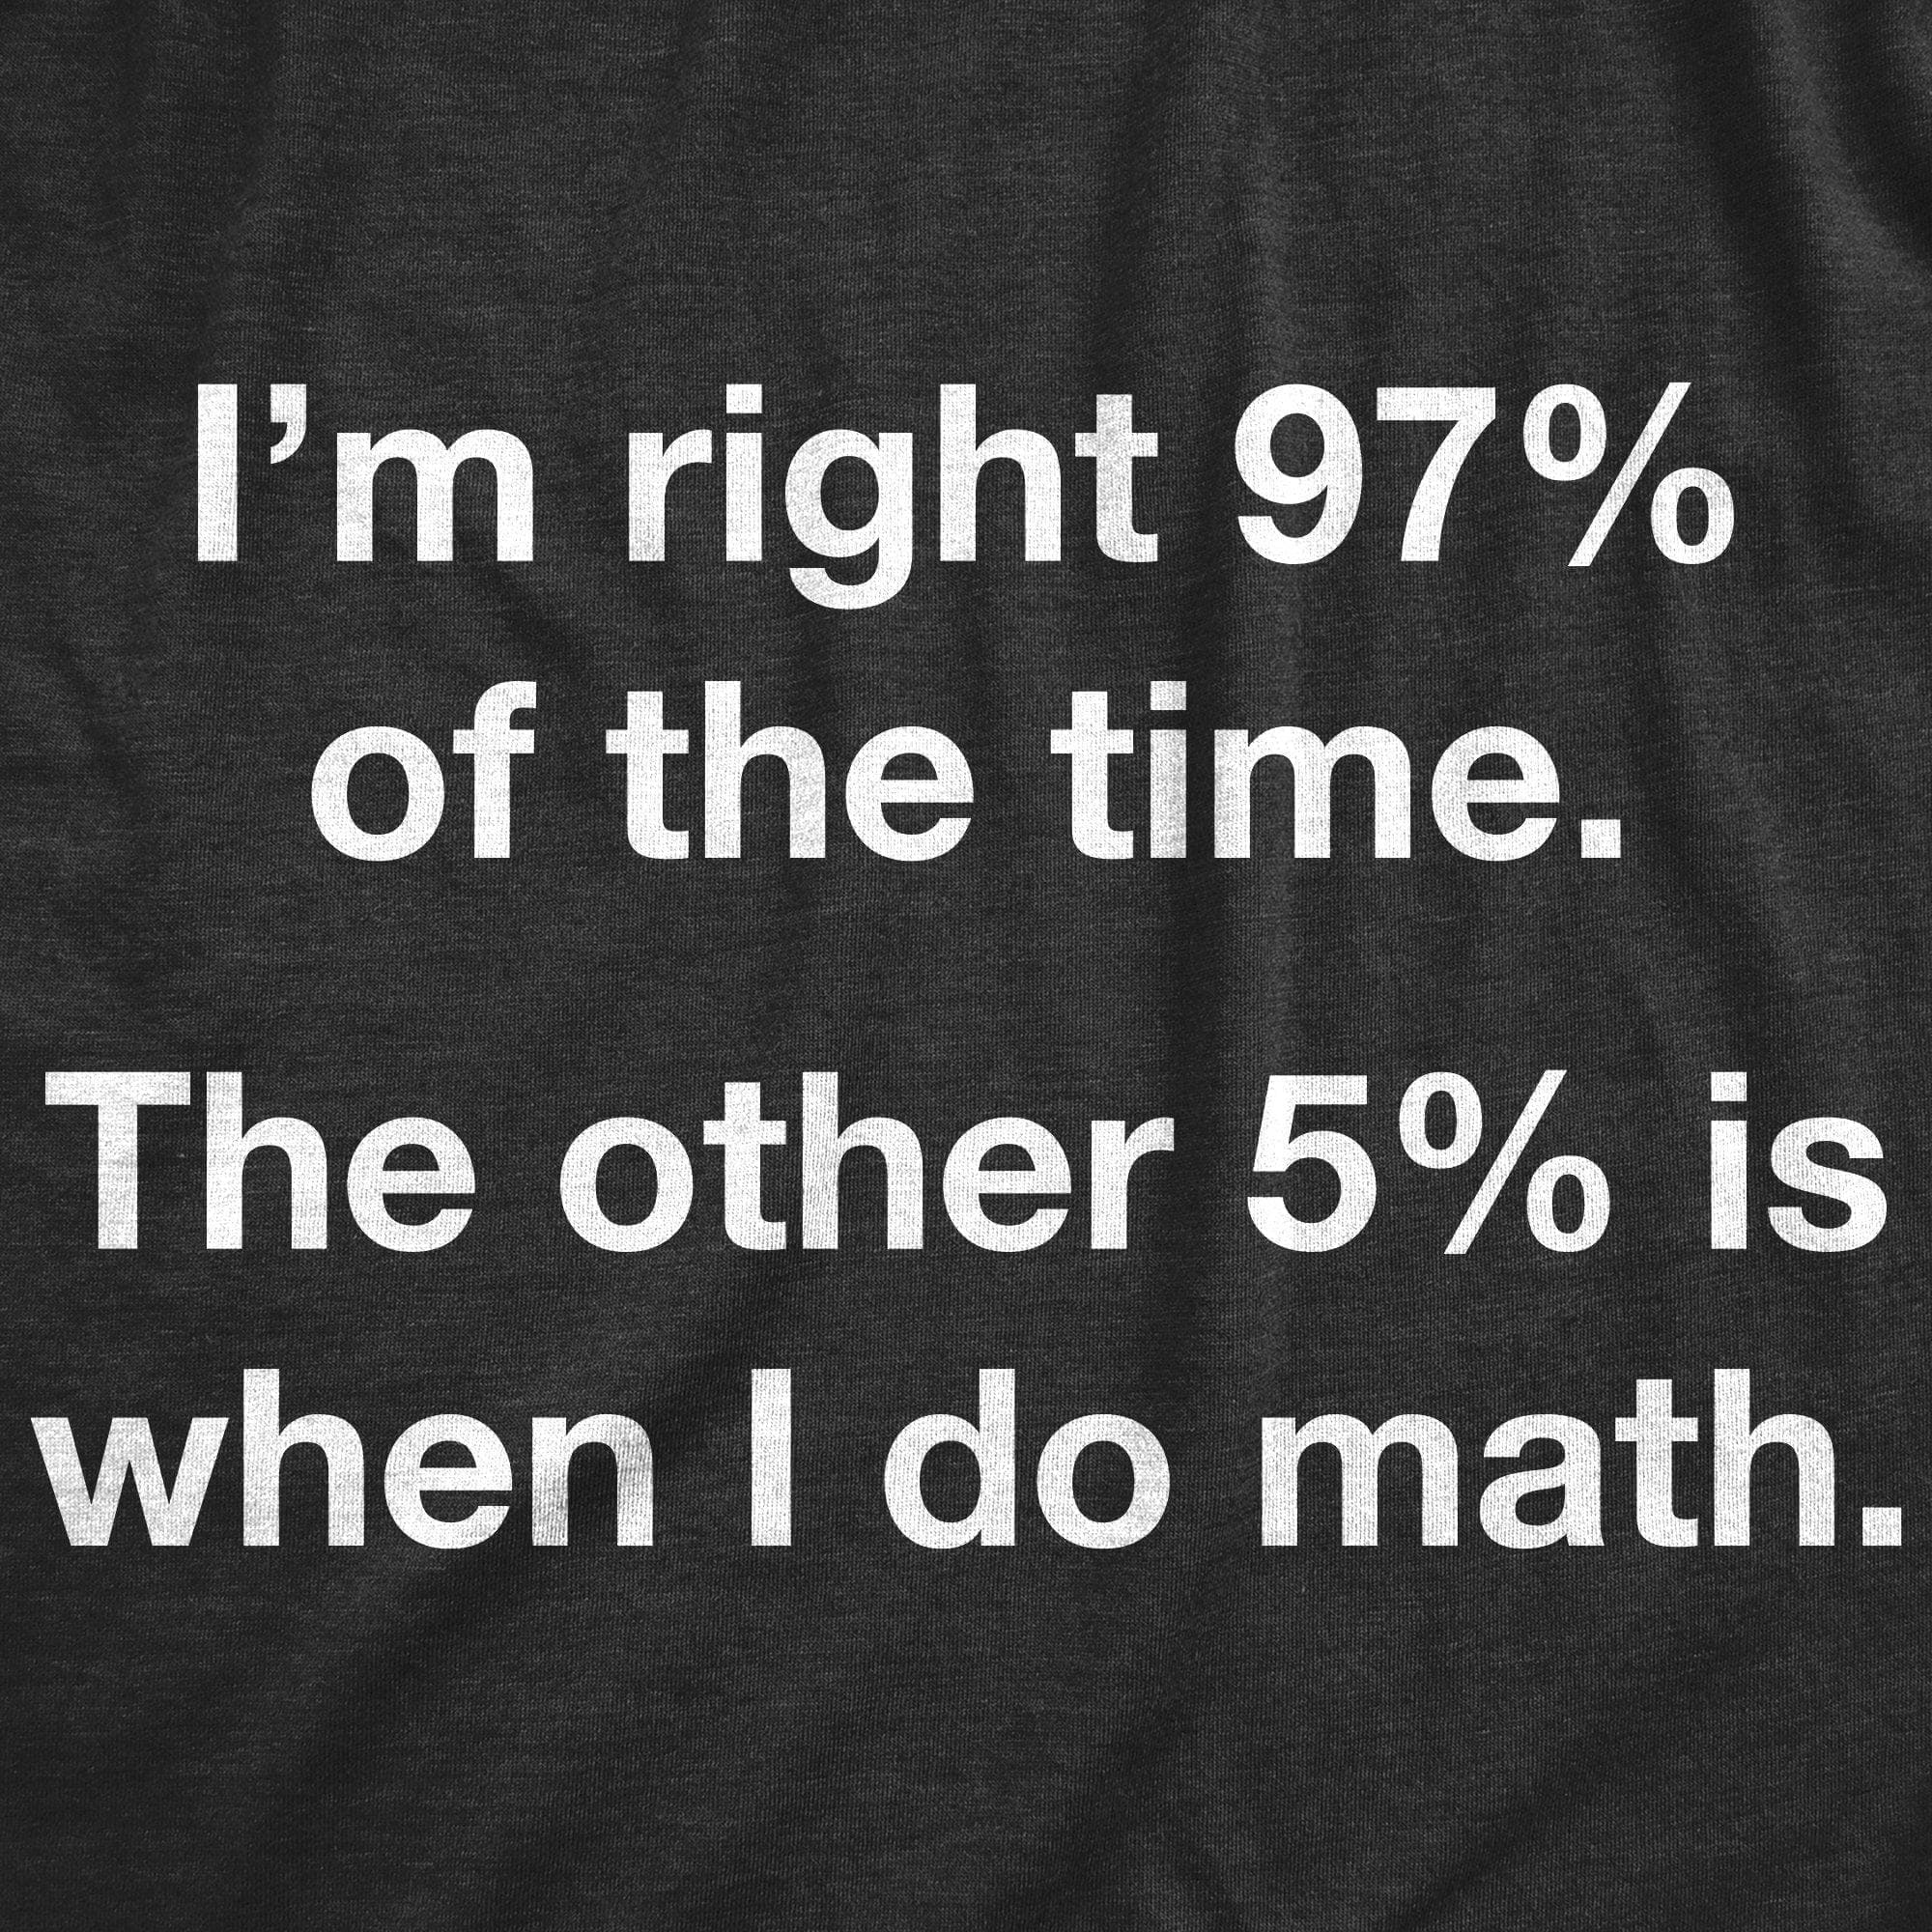 I'm Right 97% Of The Time The Other 5% Is When I Do Math Men's Tshirt - Crazy Dog T-Shirts